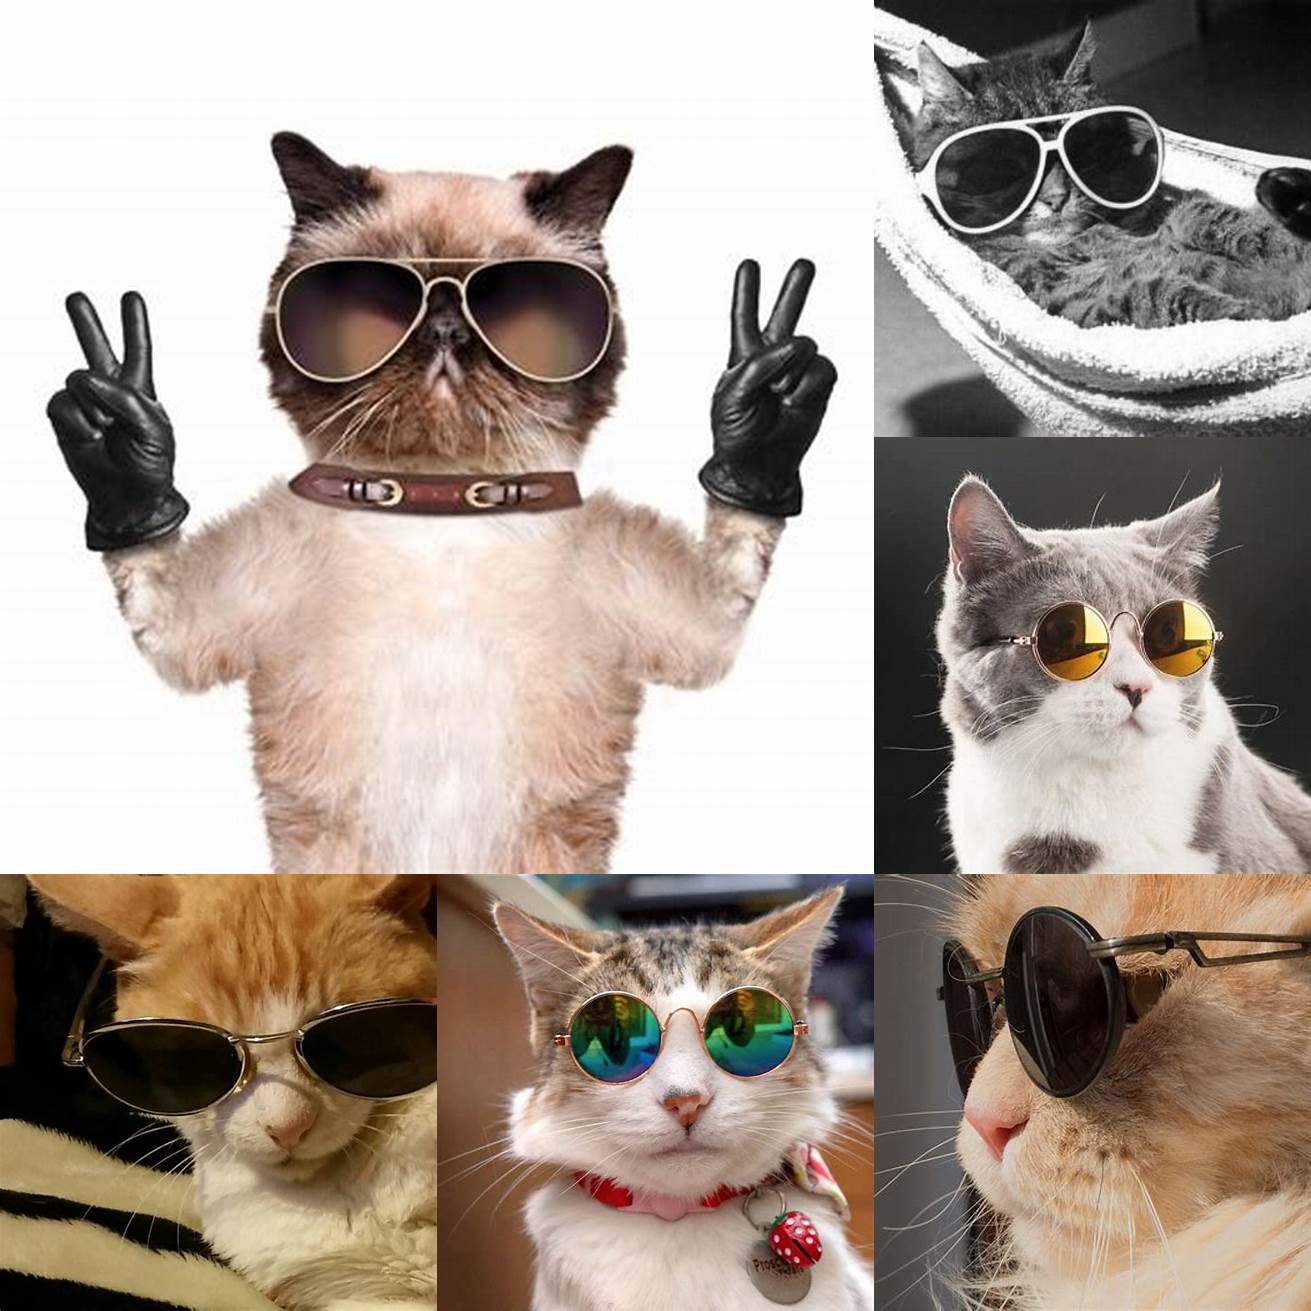 Cat with sunglasses giving the finger